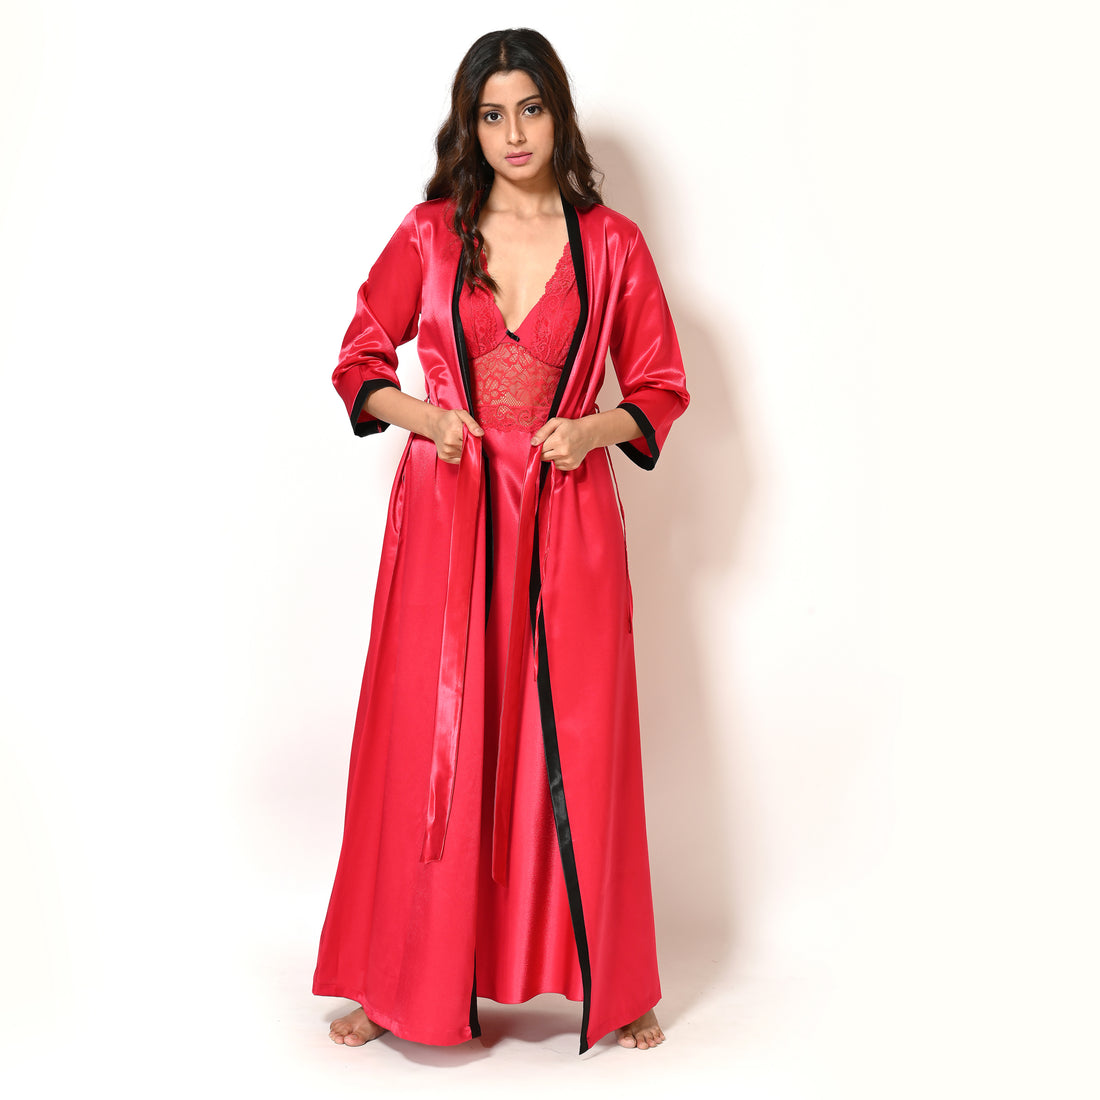 Stunning Red Satin V-Neck Bridal Nightgown Set with Lace